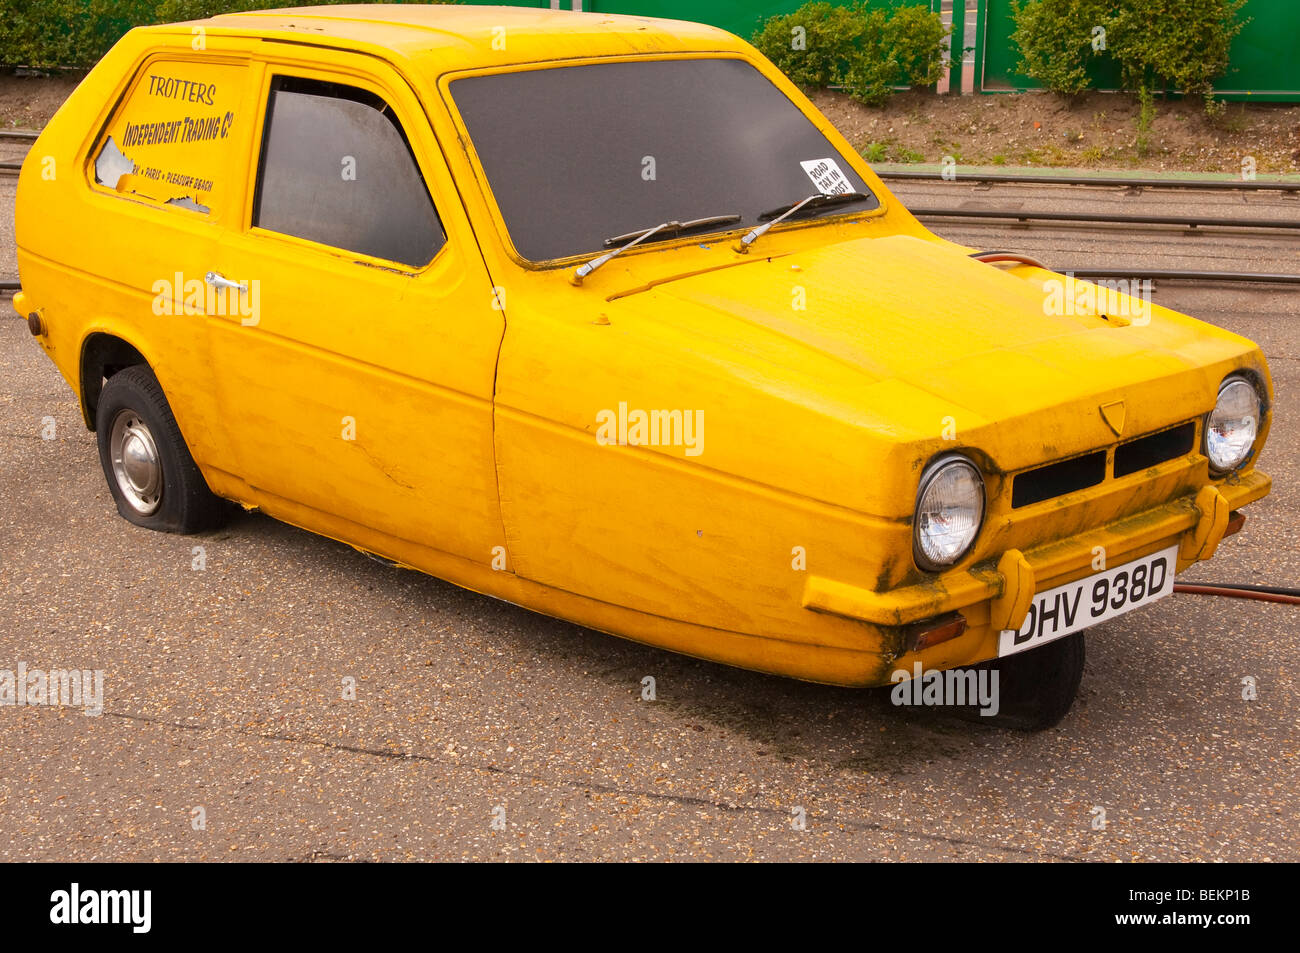 A yellow Robin Reliant from only fools & horses with Trotters Independent Trading Co. on the side in the Uk Stock Photo